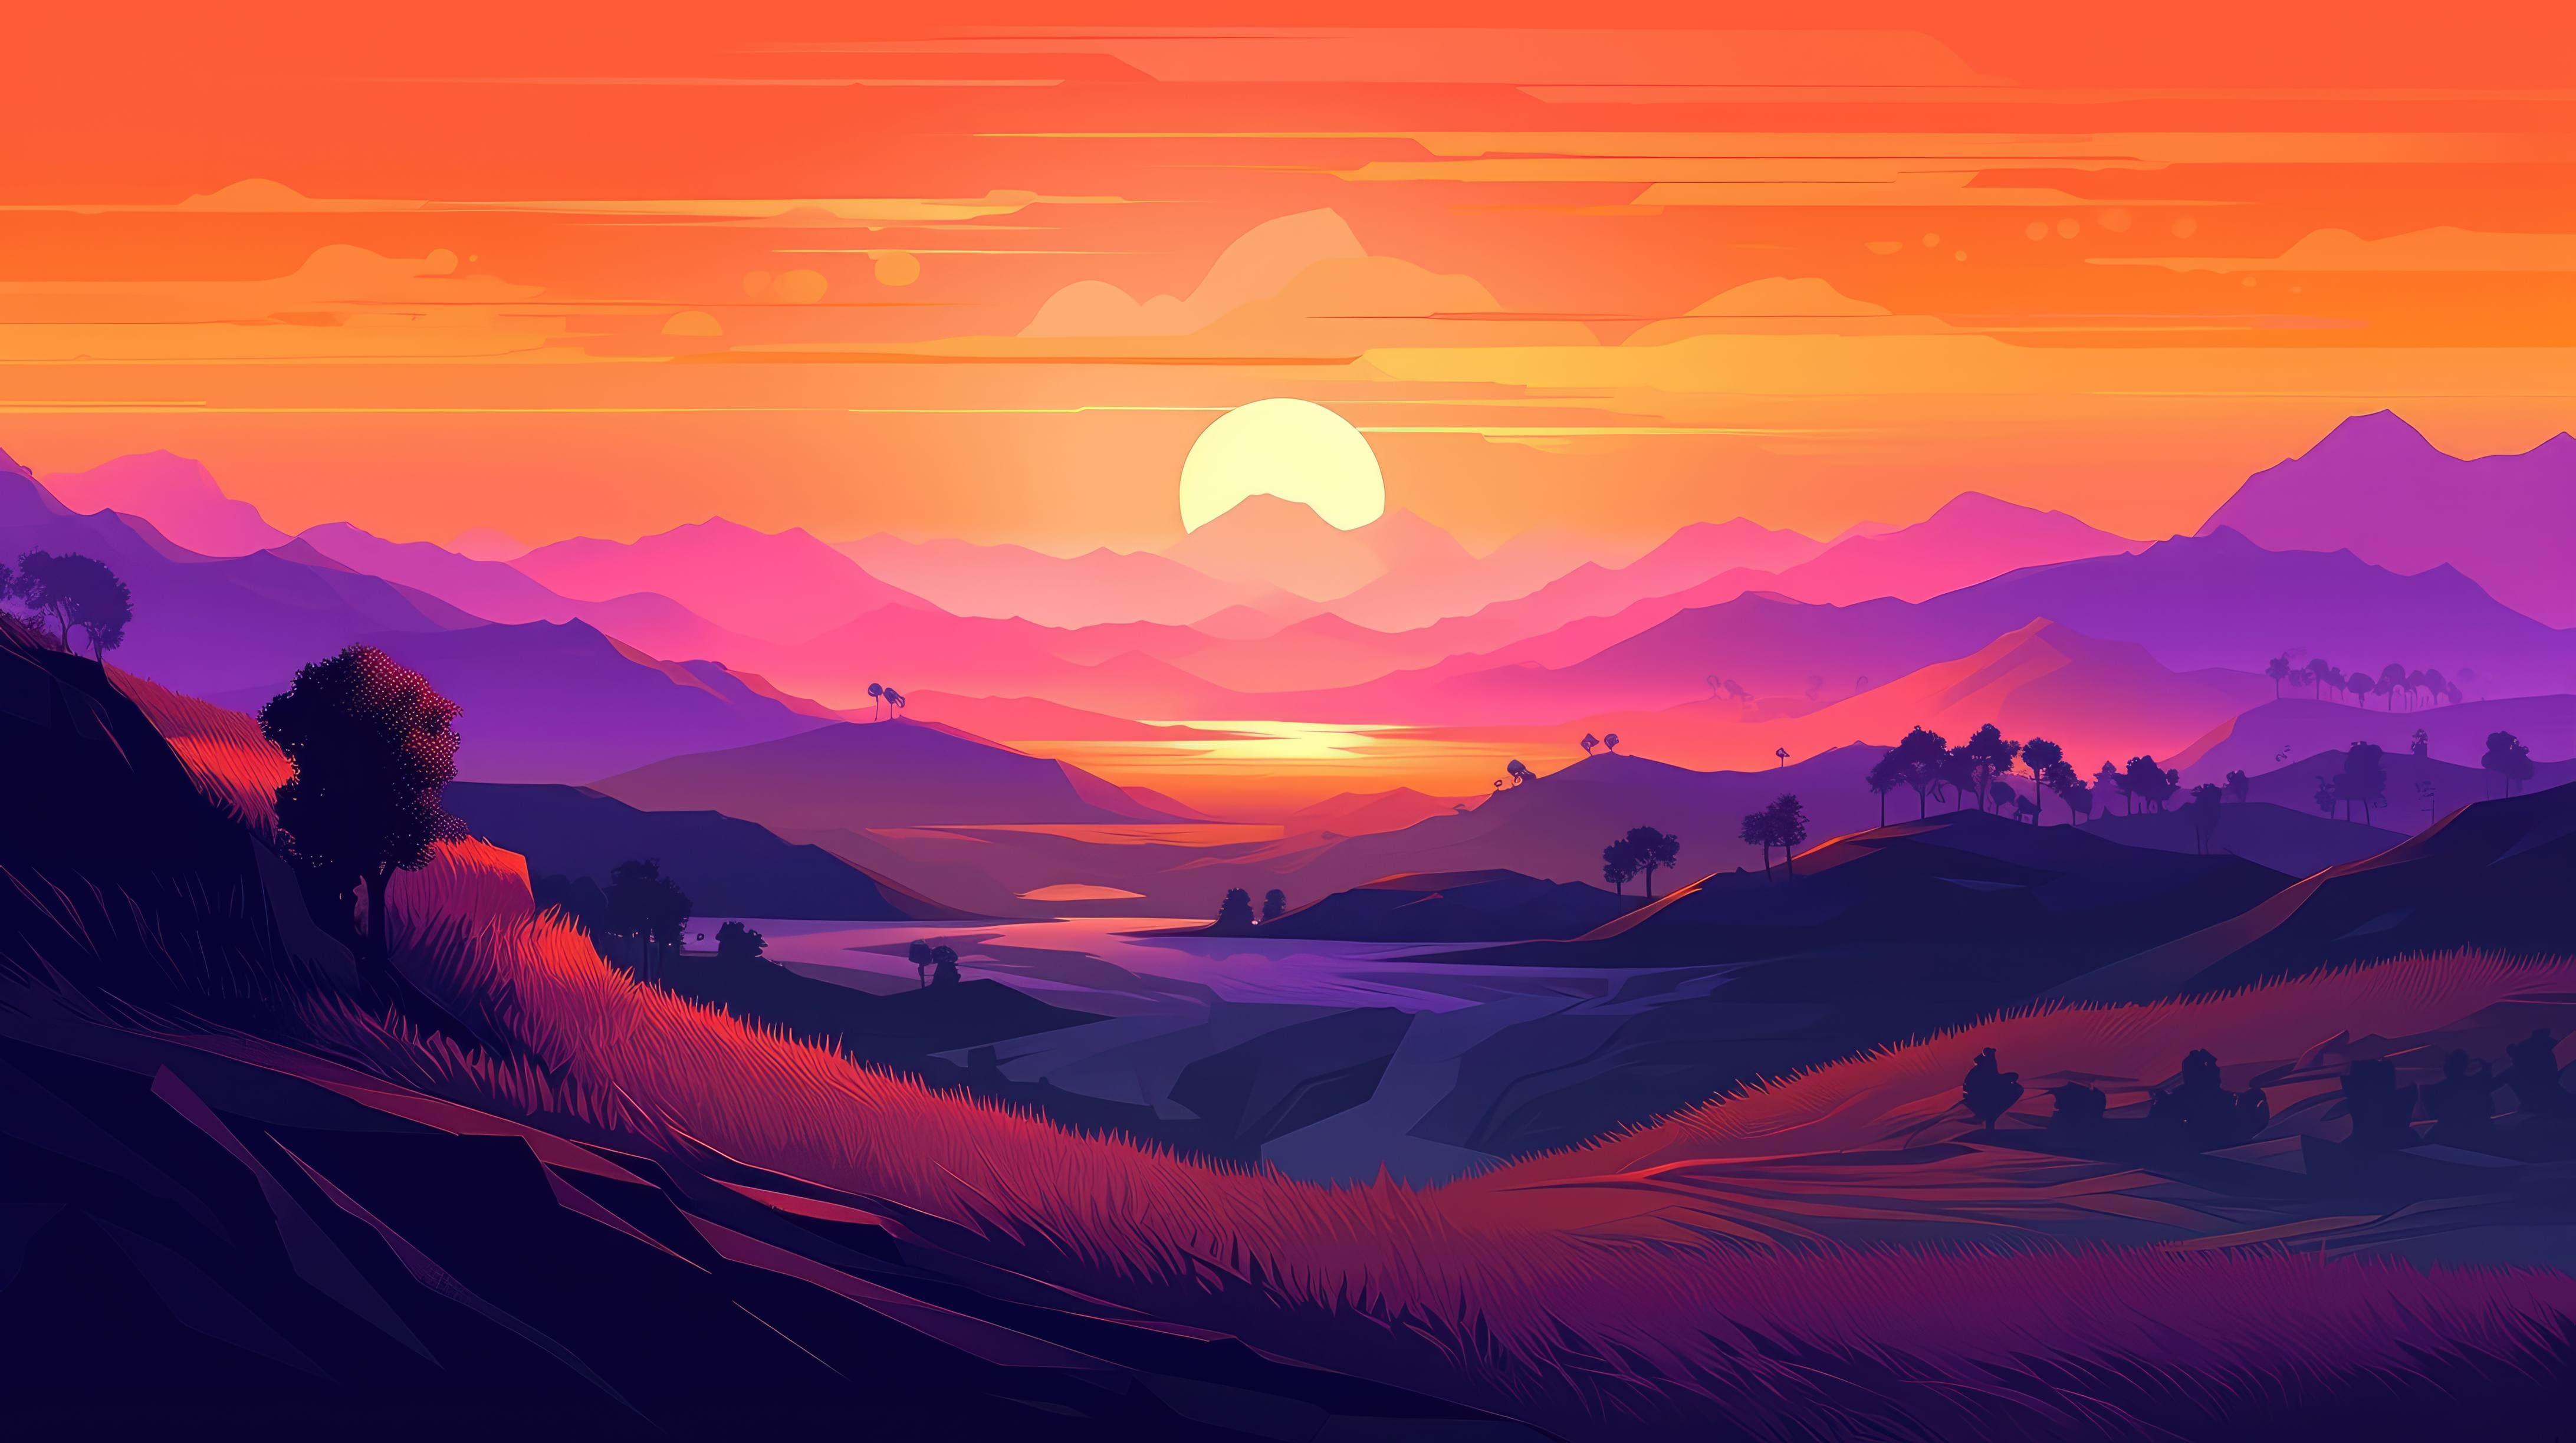 A Sunset Over Valley HD Wallpaper 4k Background